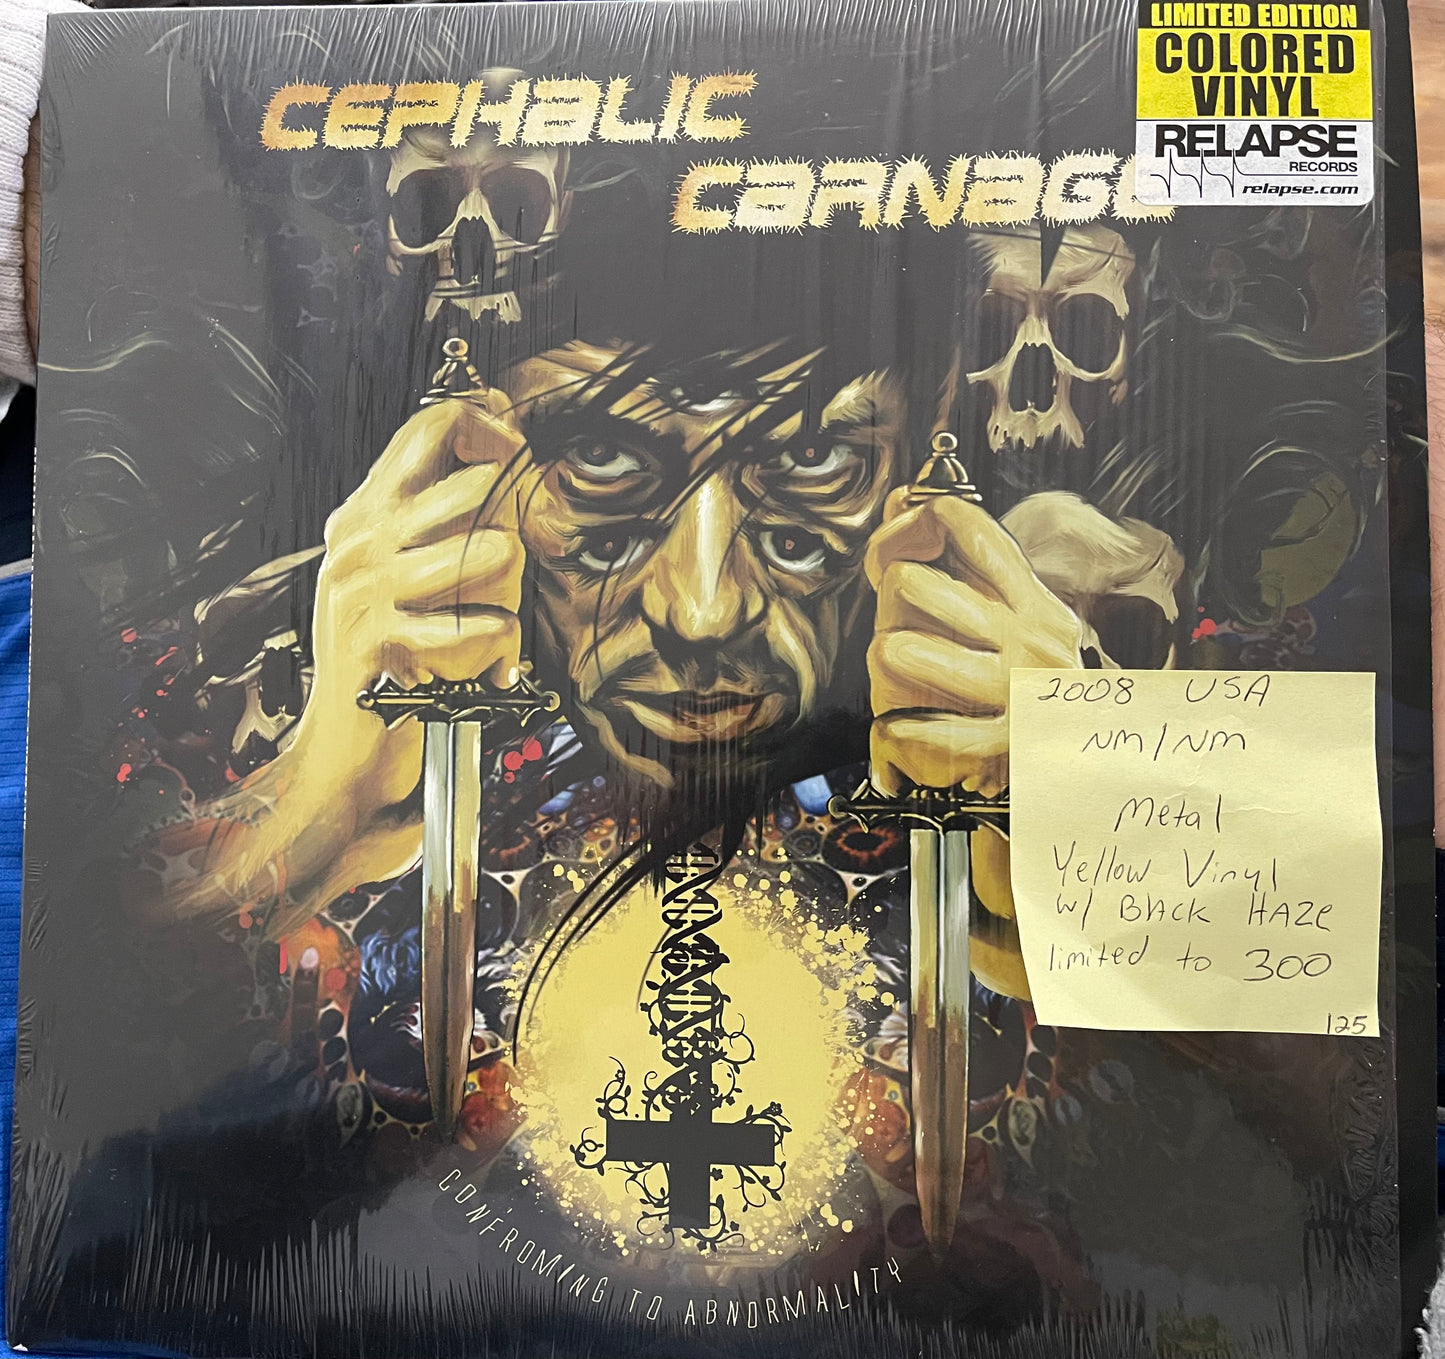 Cephalic Carnage - Conforming to Abnormality (Yellow/Black Haze. Limited to 300)